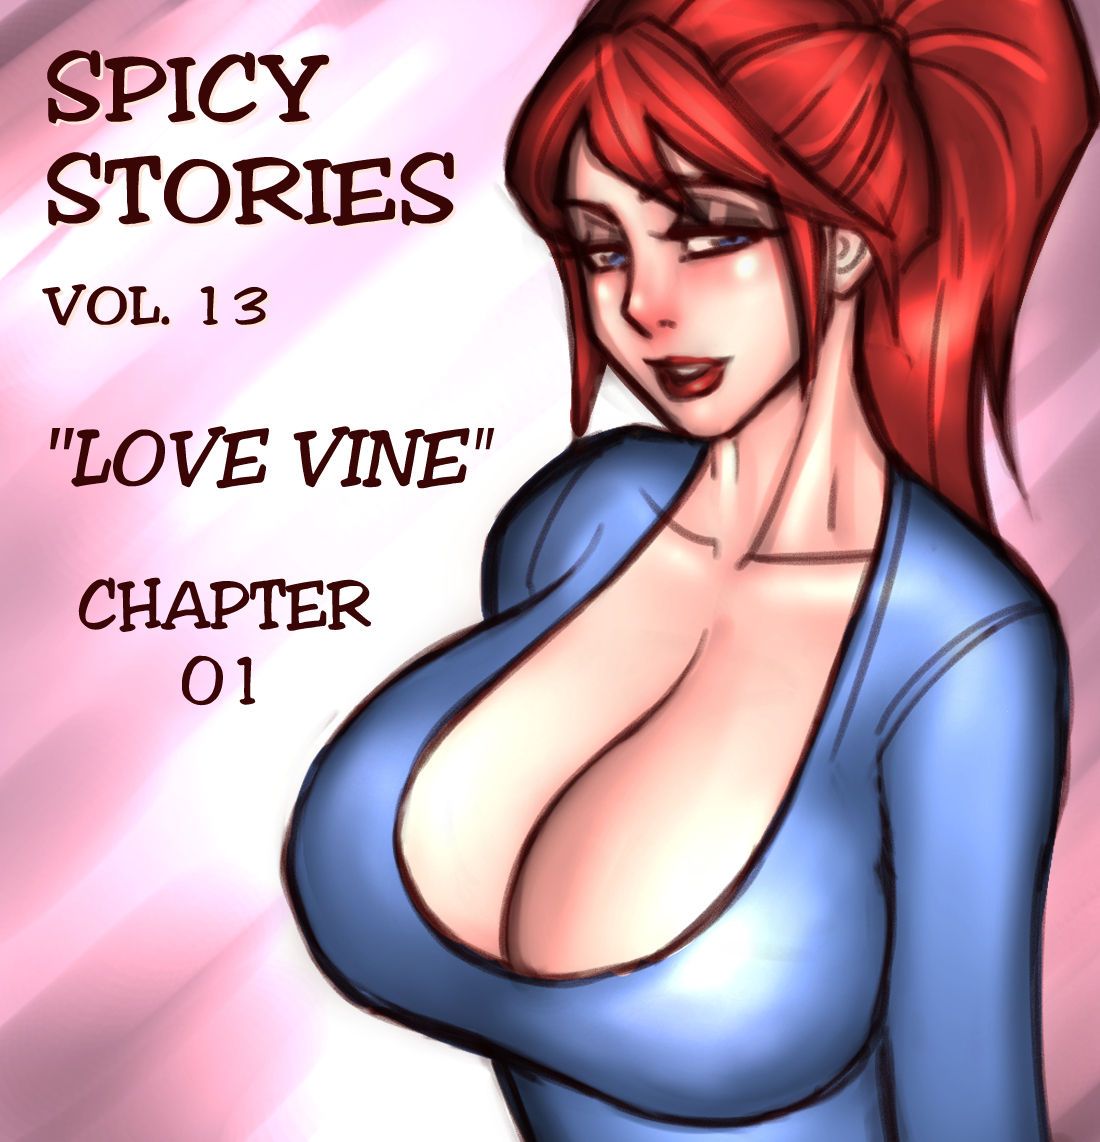 NGT Spicy Stories 13 - Love Vine (Ongoing) NGT Spicy Stories 13 - Love Vine (Ongoing) 32